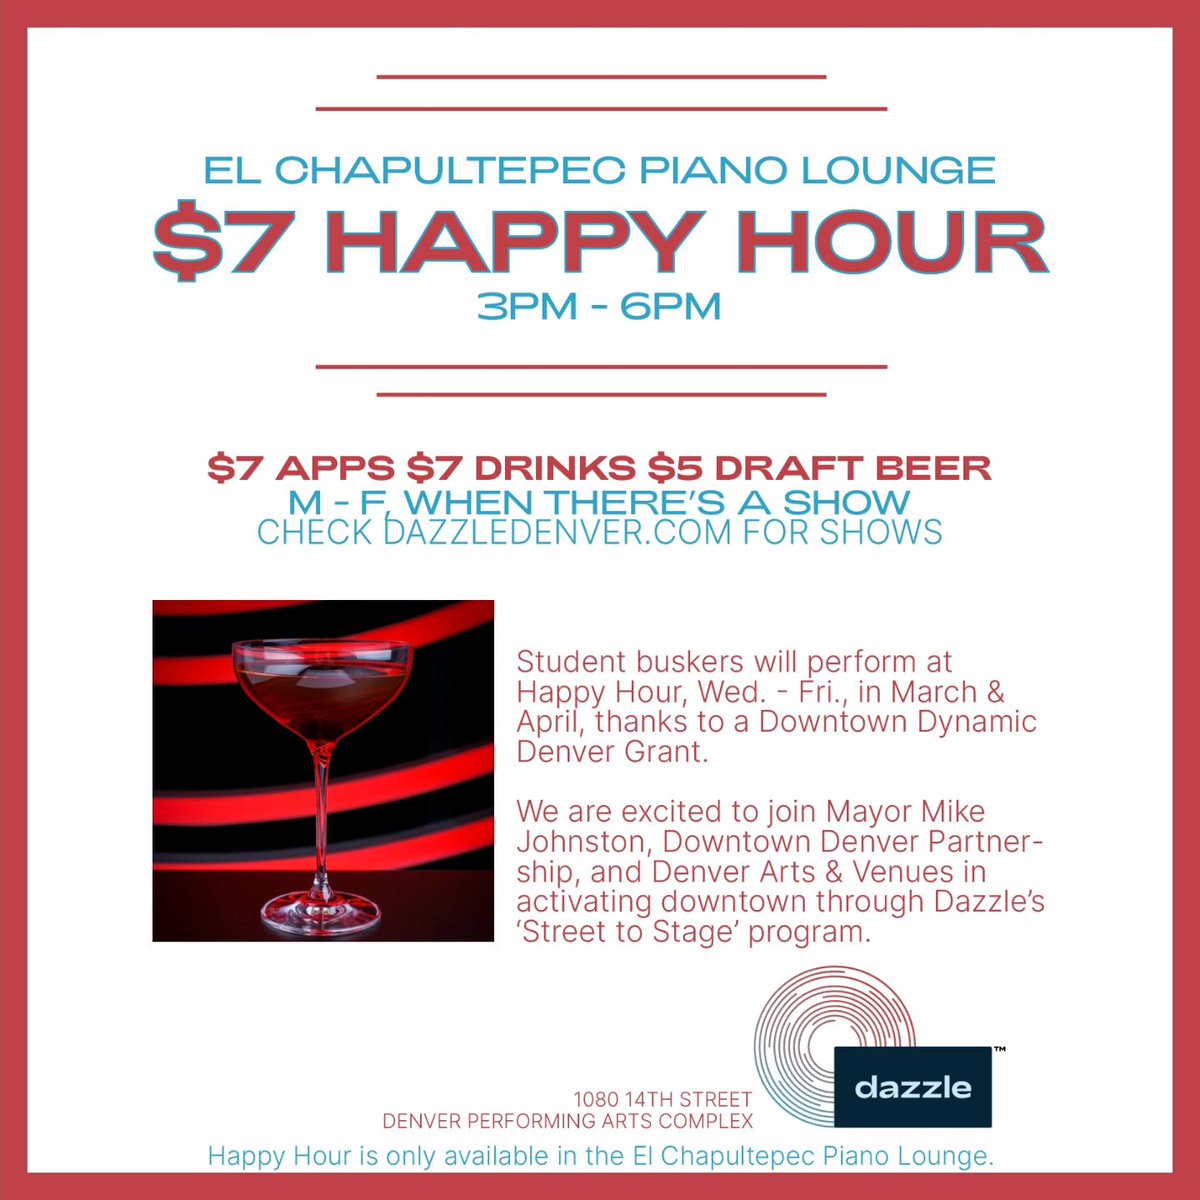 Looking to grab a quick drink or bite after work, plus enjoy some FREE live music? Stop by @DazzleDenver for happy hour and take in some tunes from student buskers as part of their 'Street to Stage' program, supported through a #DynamicDowntownDenver grant 🎶